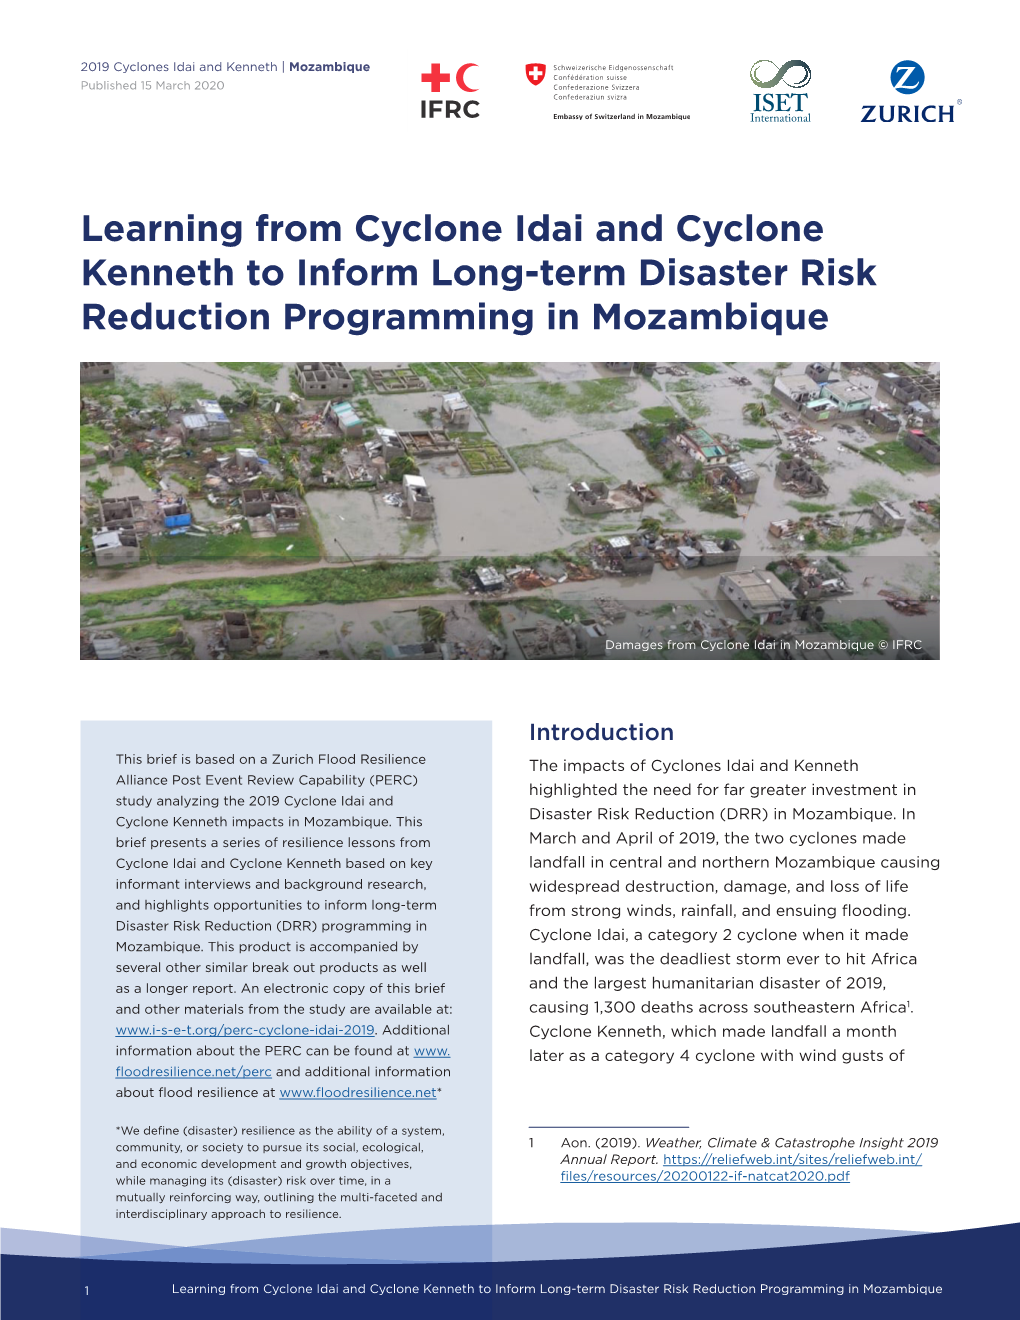 Learning from Cyclone Idai and Cyclone Kenneth to Inform Long-Term Disaster Risk Reduction Programming in Mozambique